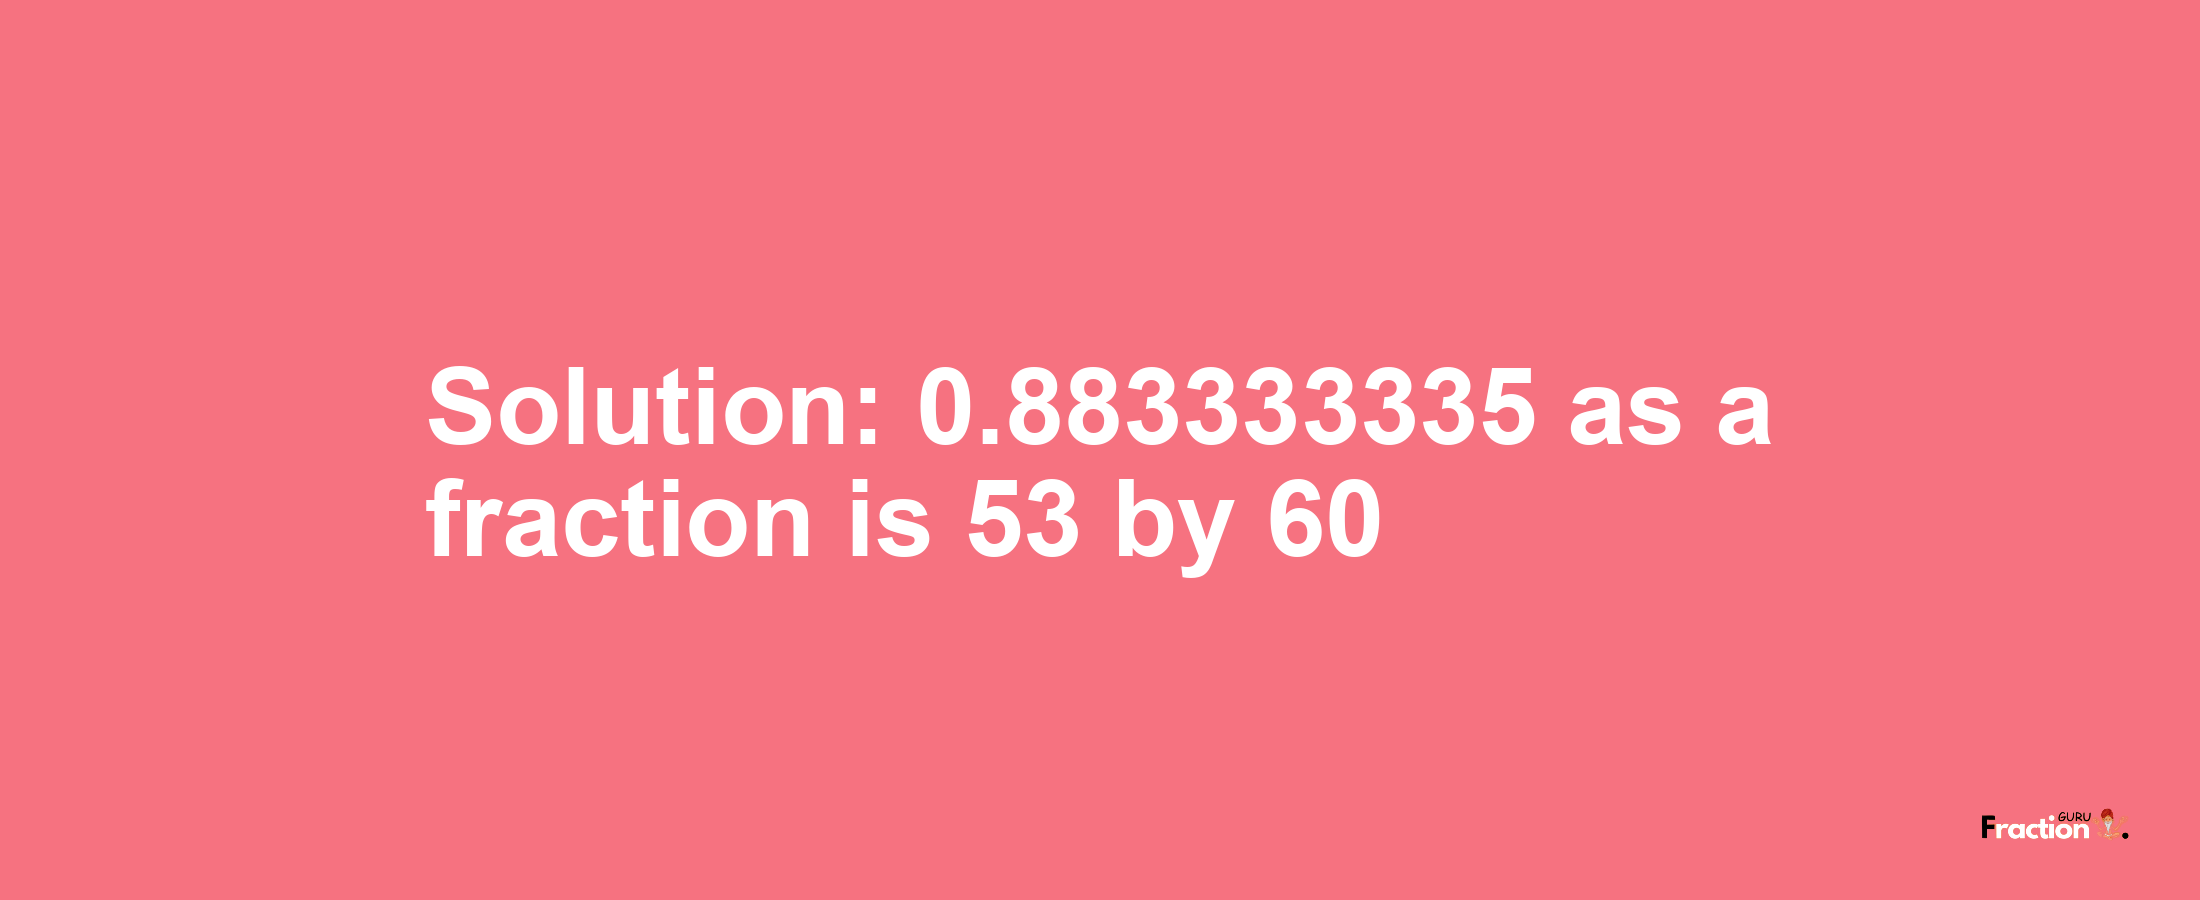 Solution:0.883333335 as a fraction is 53/60